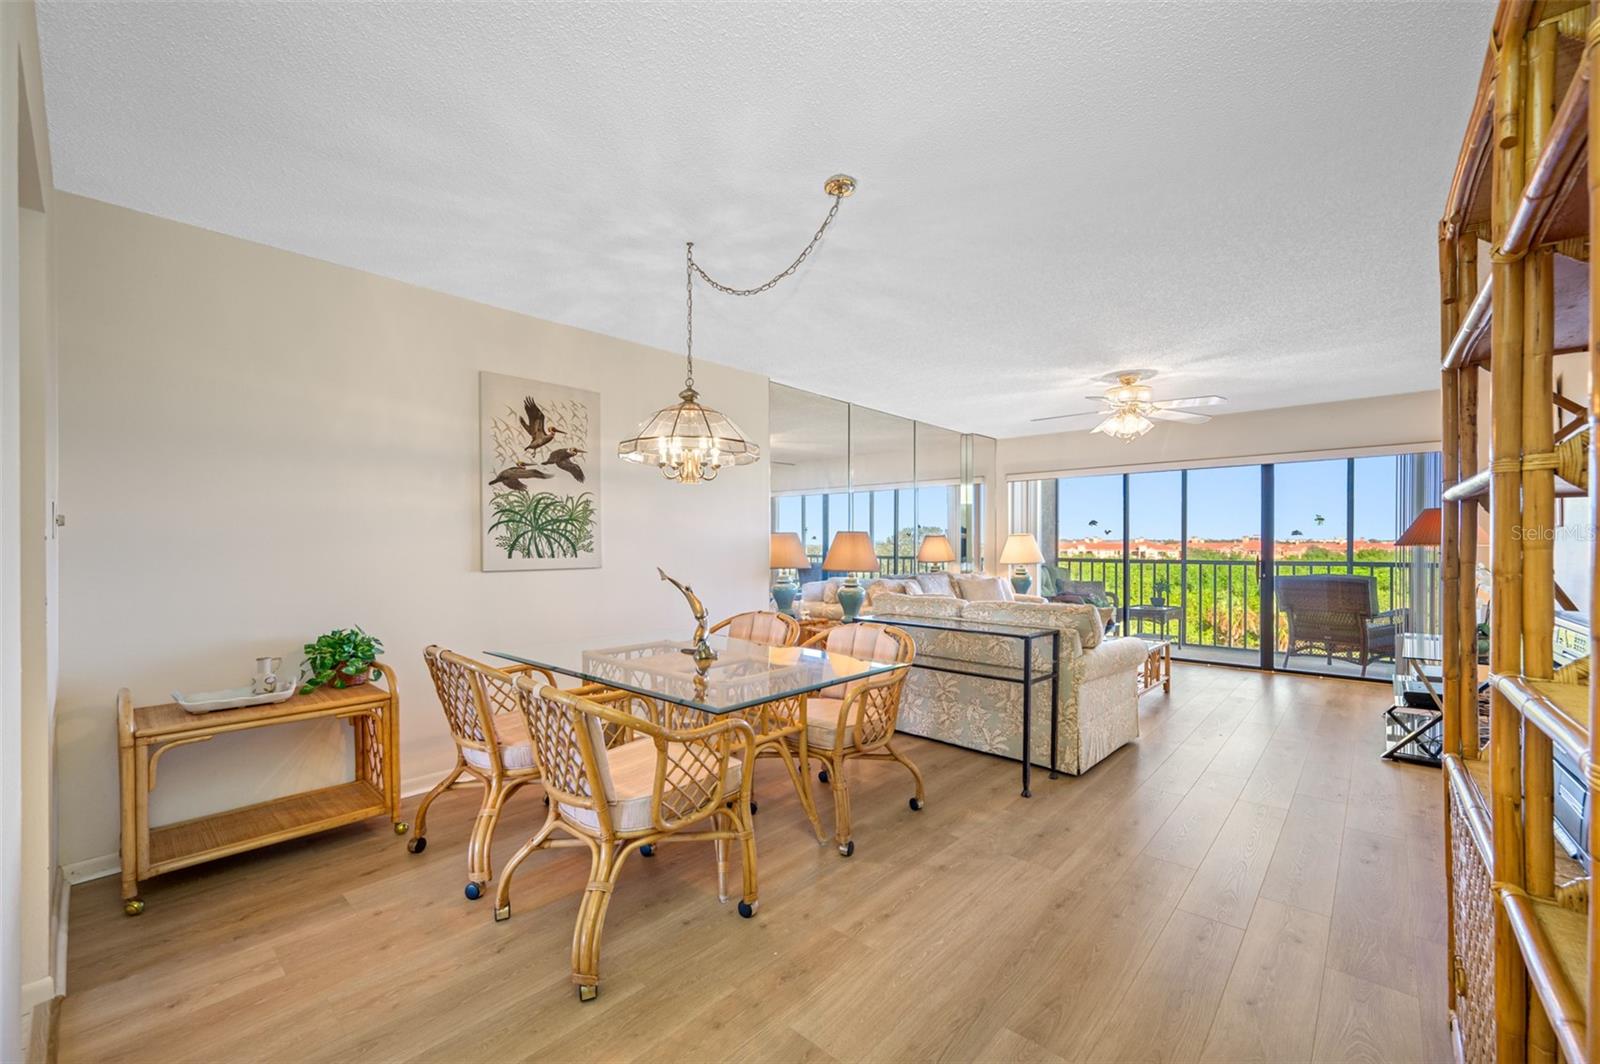 Living room and dining combination area, leading direct to the lanai and bay view.